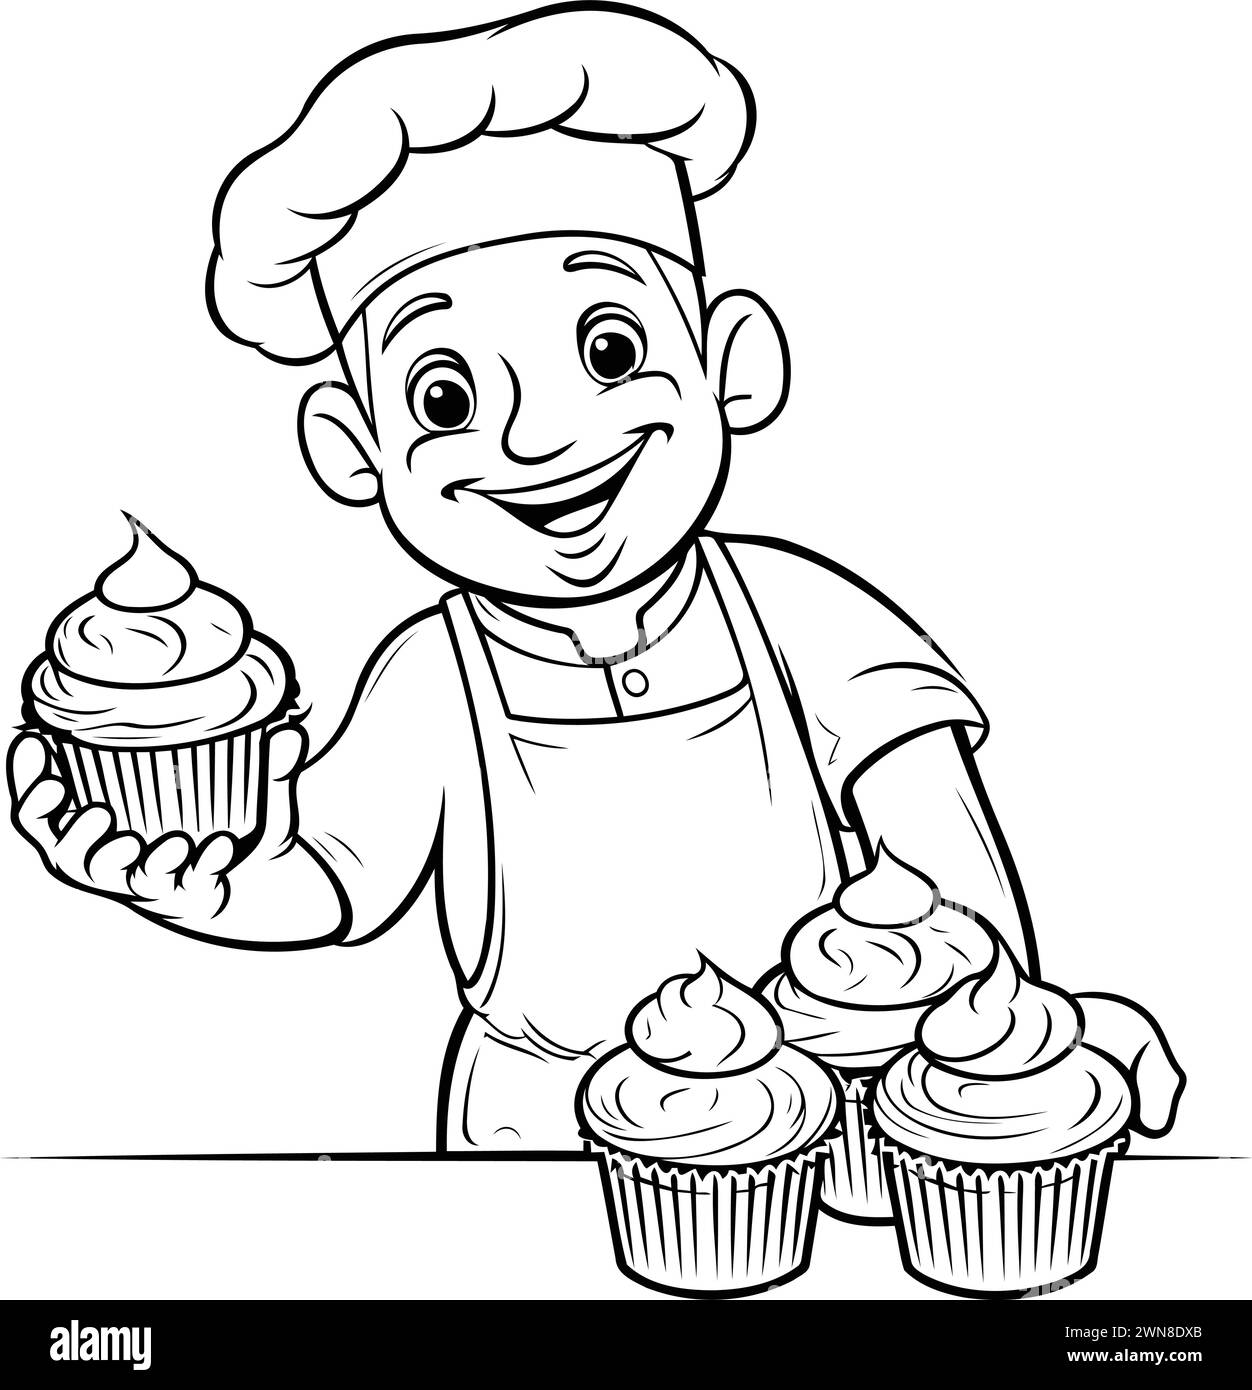 Black and White Cartoon Illustration of Little Boy Chef with Cupcakes for Coloring Book Stock Vector